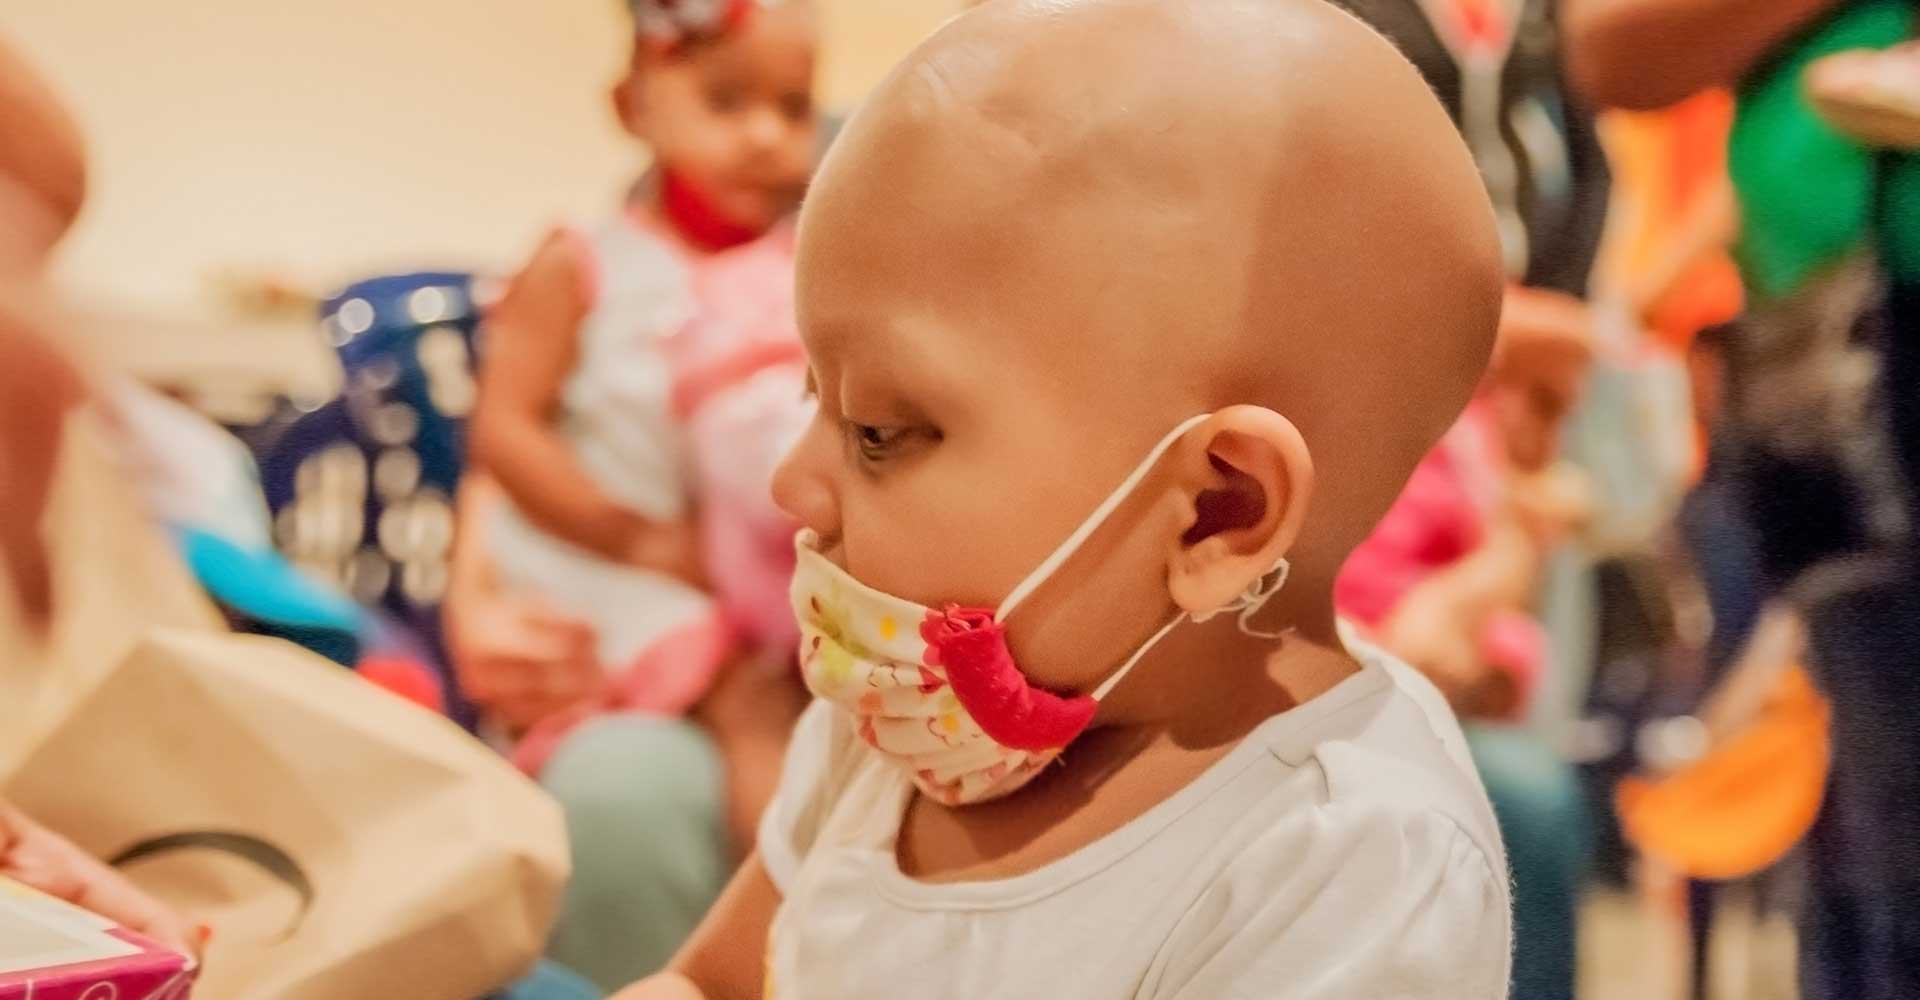 Child with Cancer